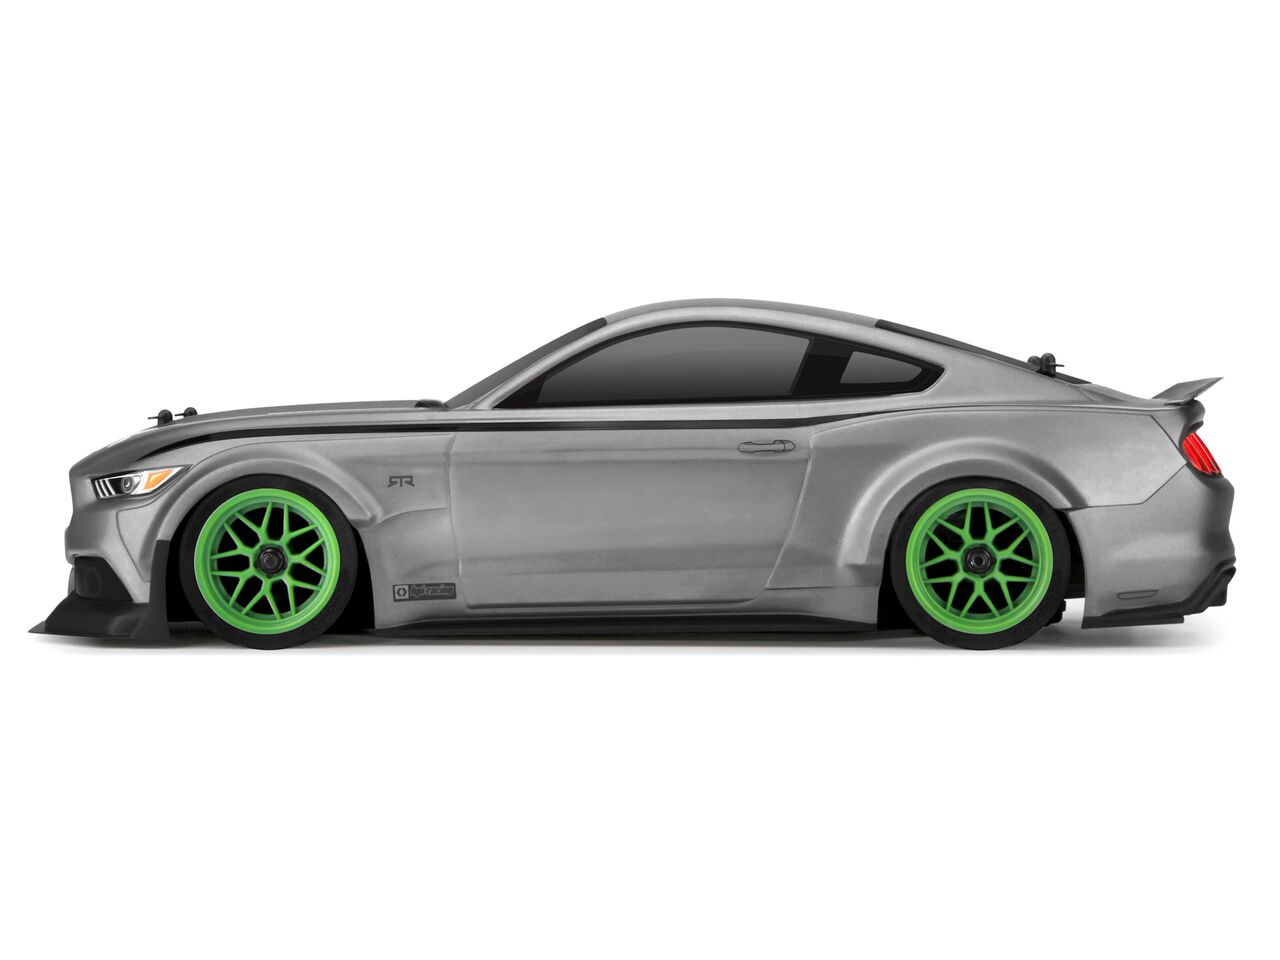  1/10 -  RS4 SPORT 3 2015 FORD MUSTANG RTR SPEC 5